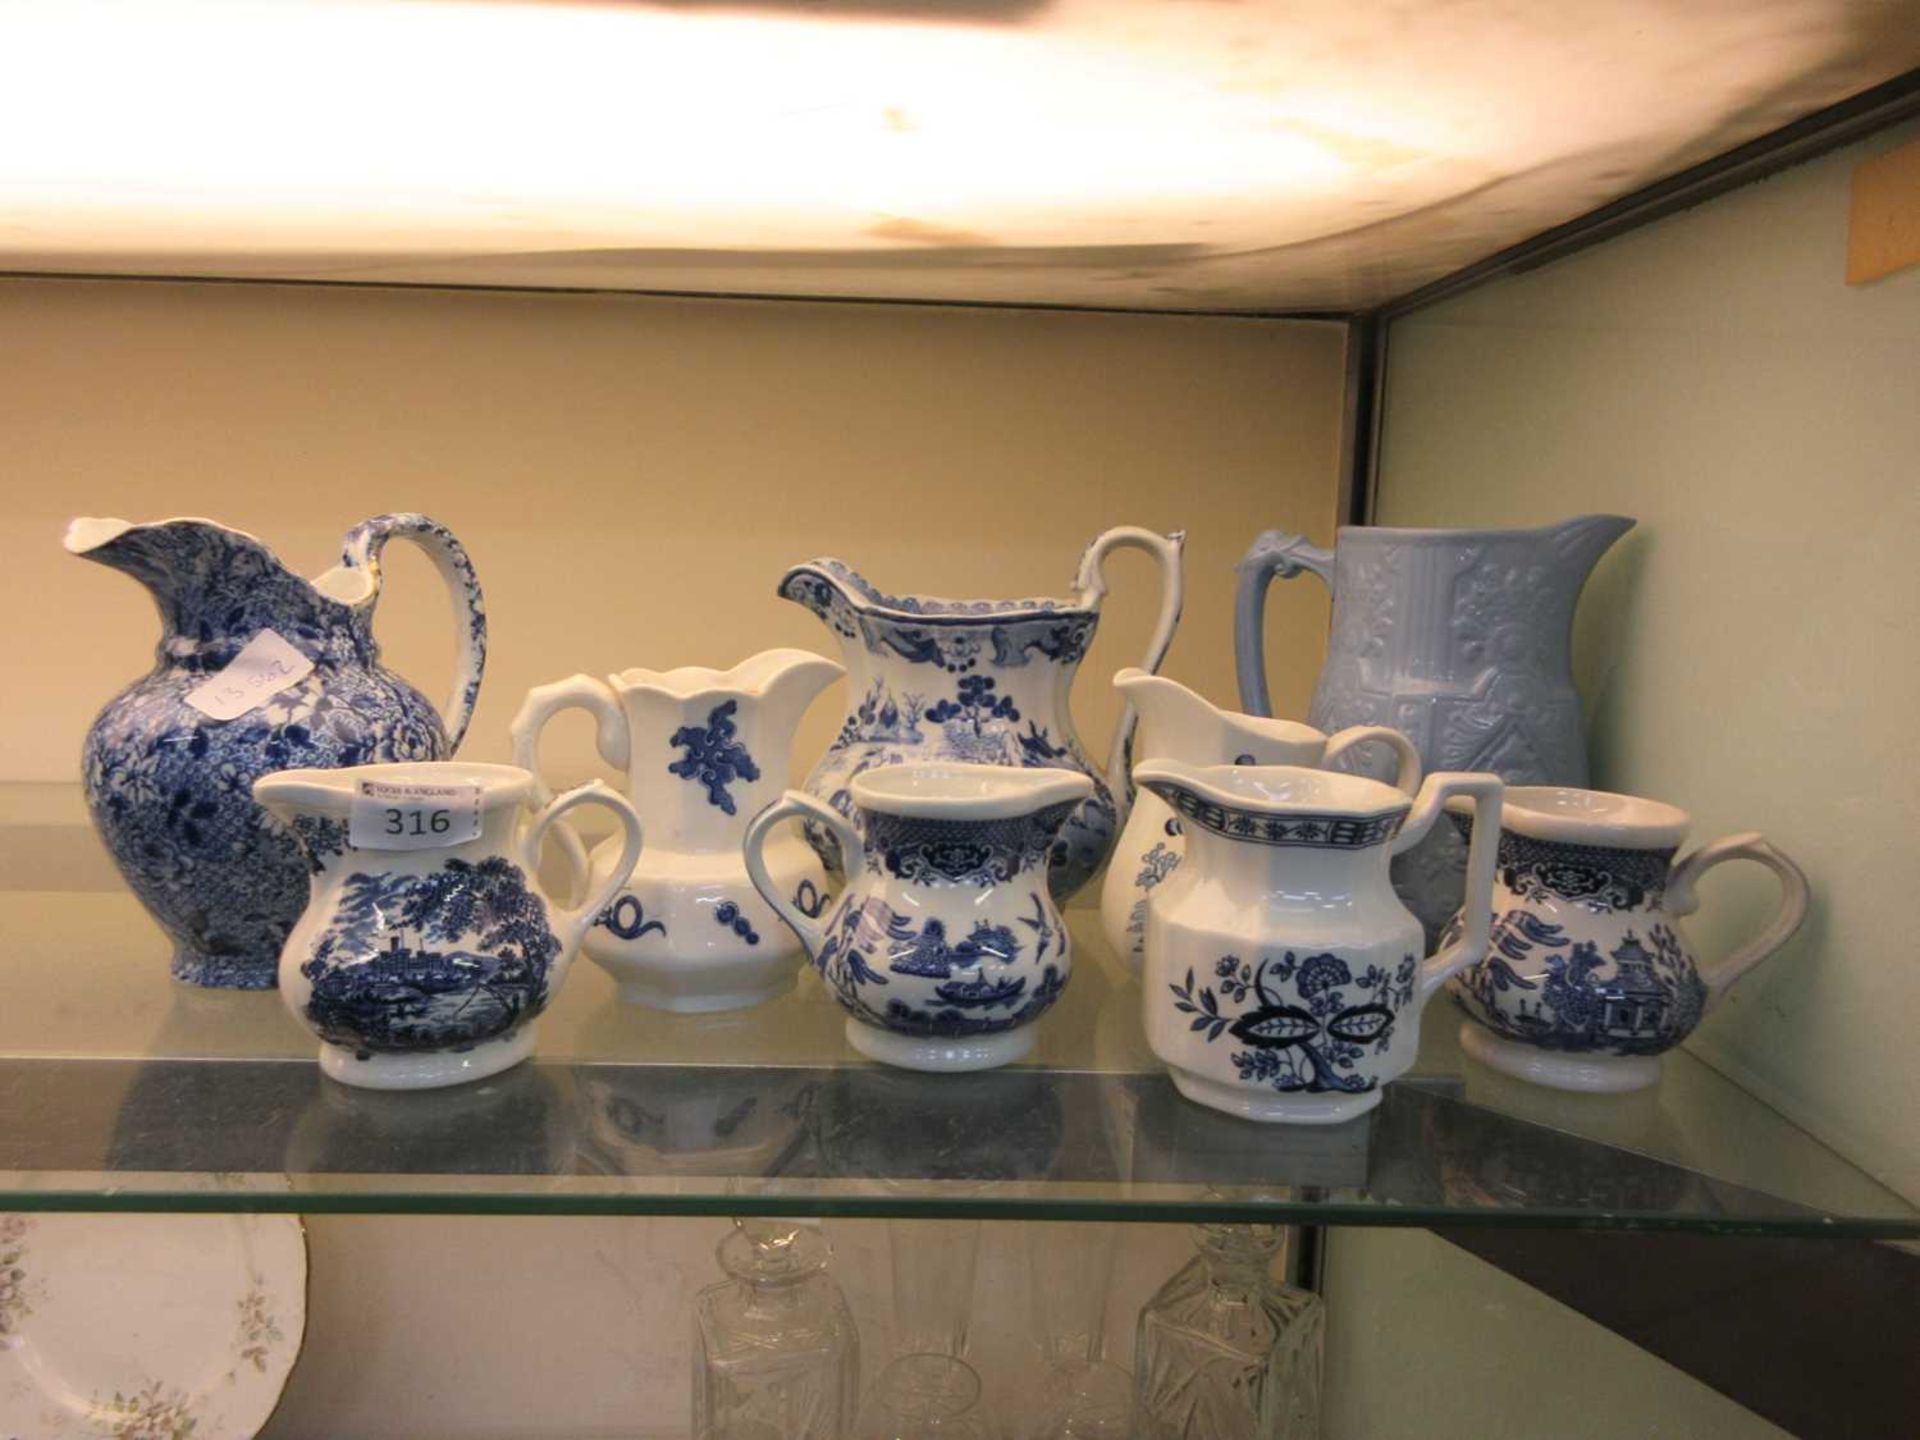 A selection of blue and white ceramic pouring jugs